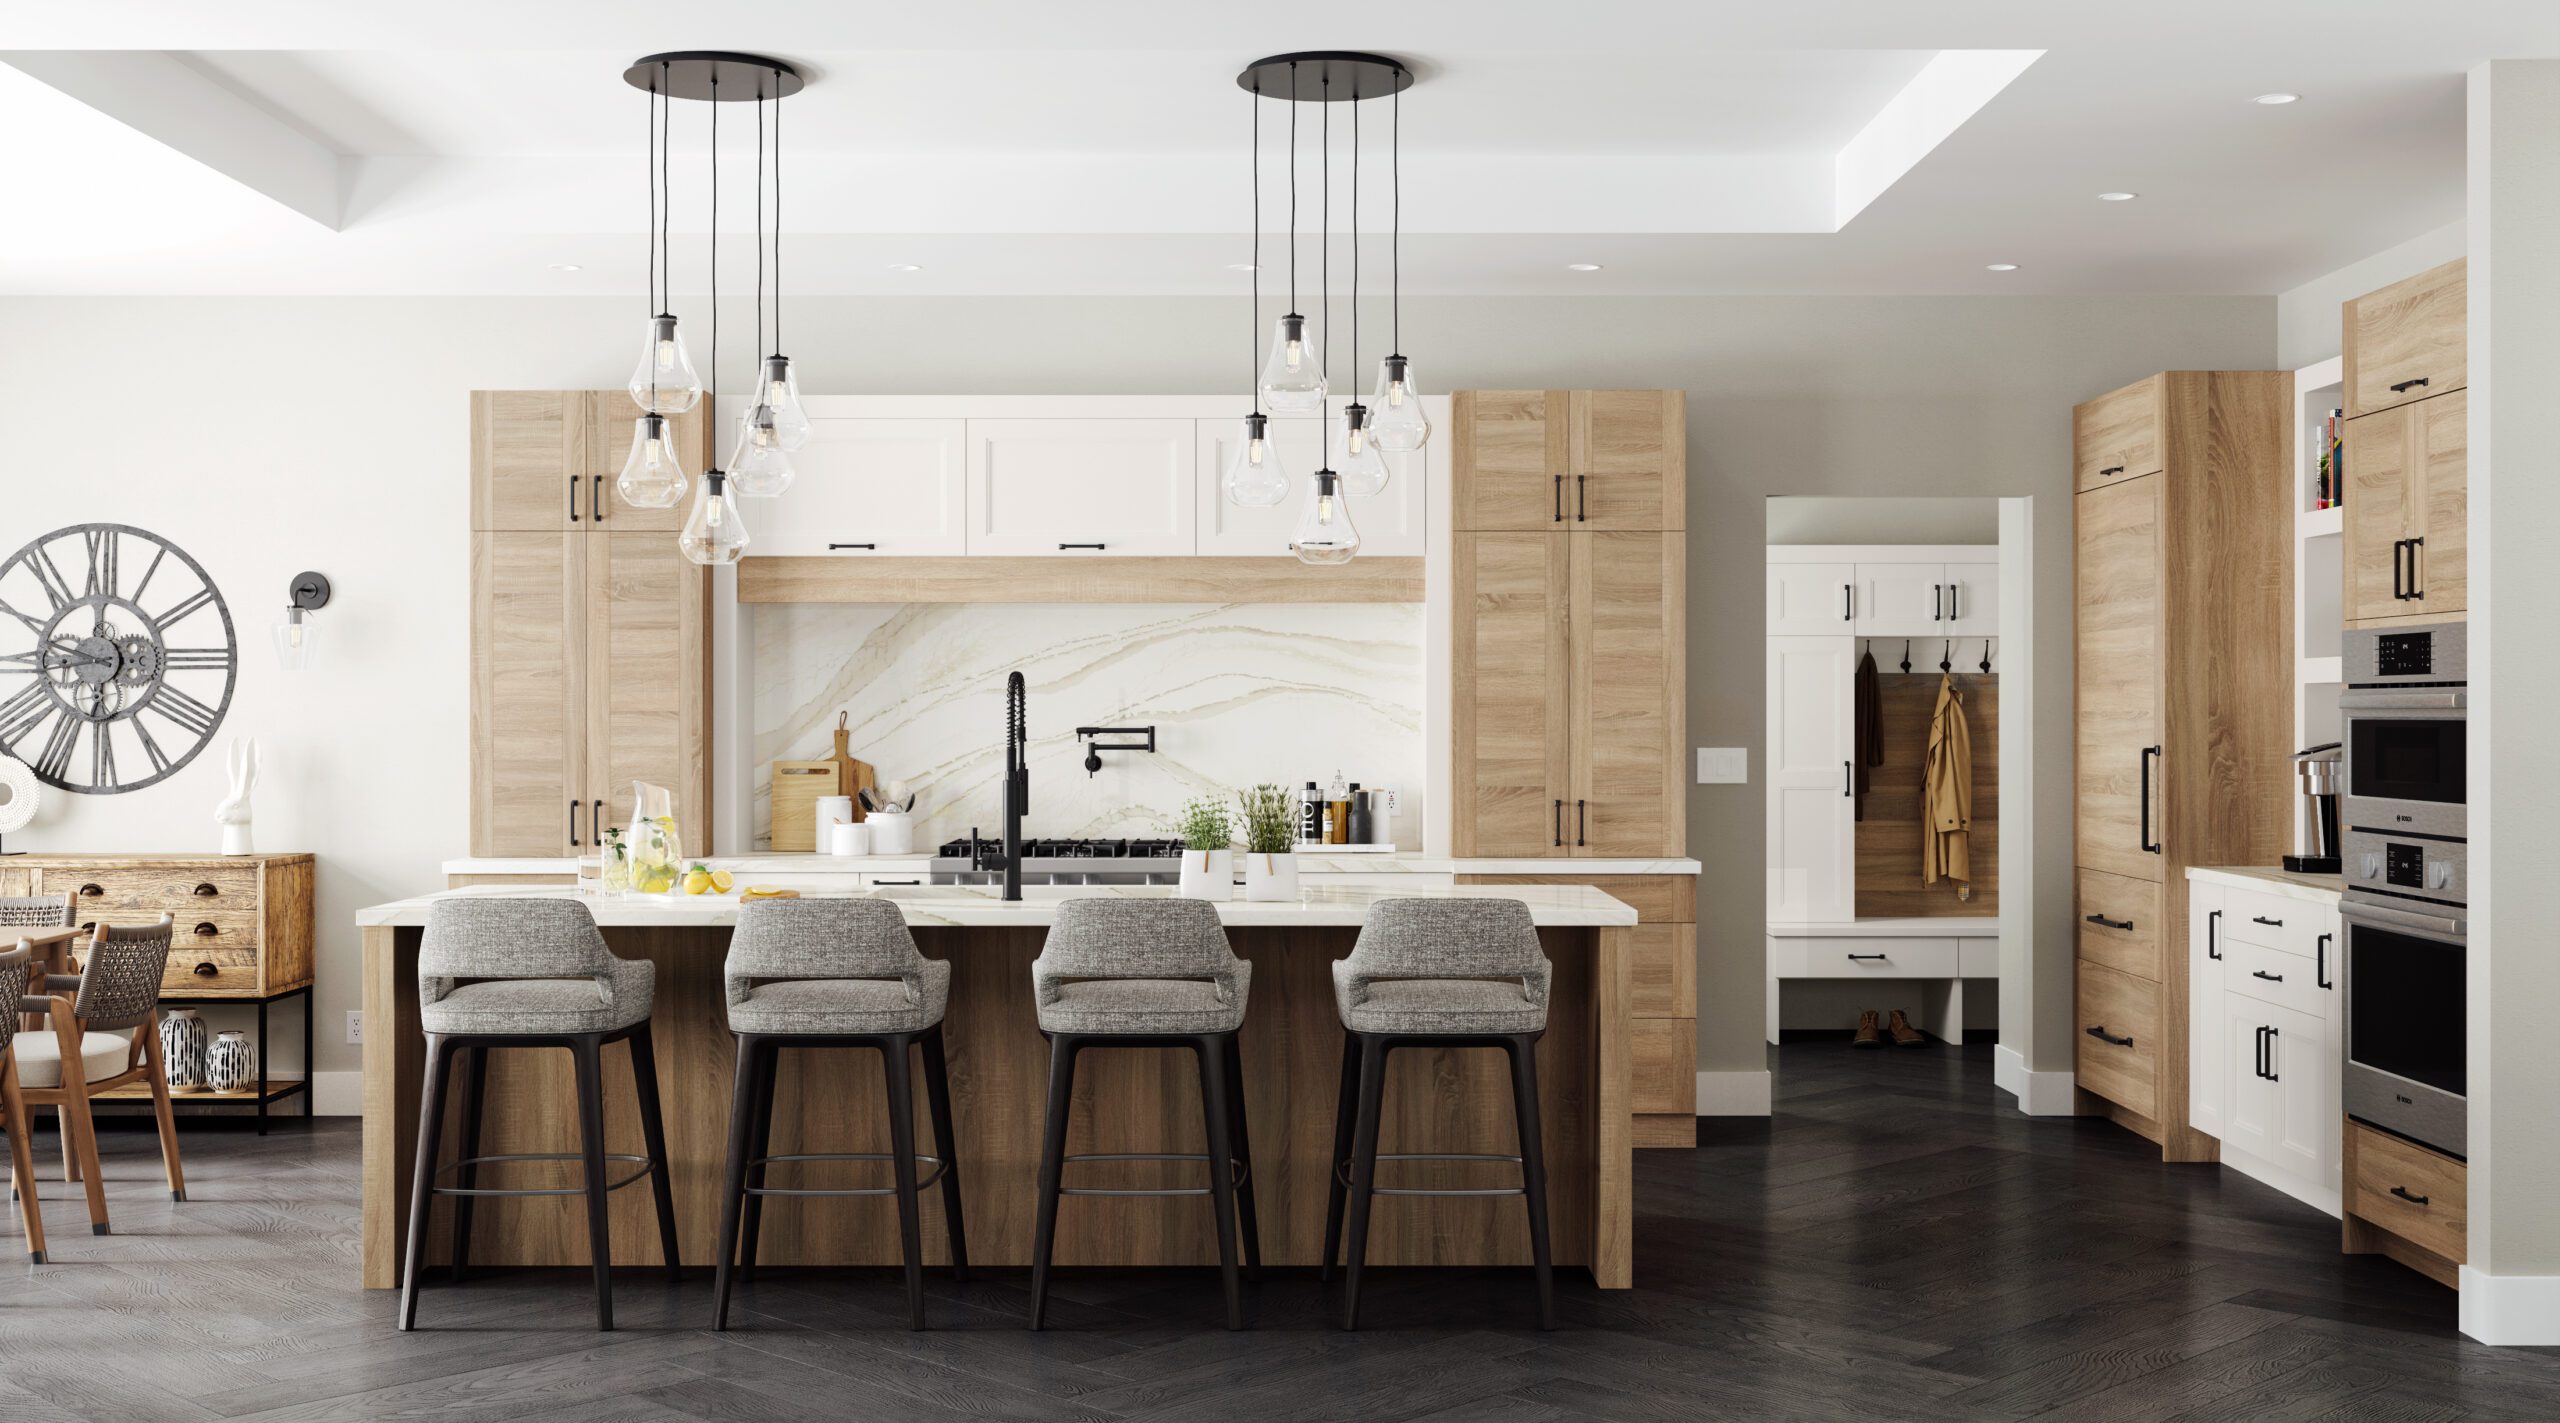 Supreme Cabinetry Brands - A Legacy of Quality Cabinetry